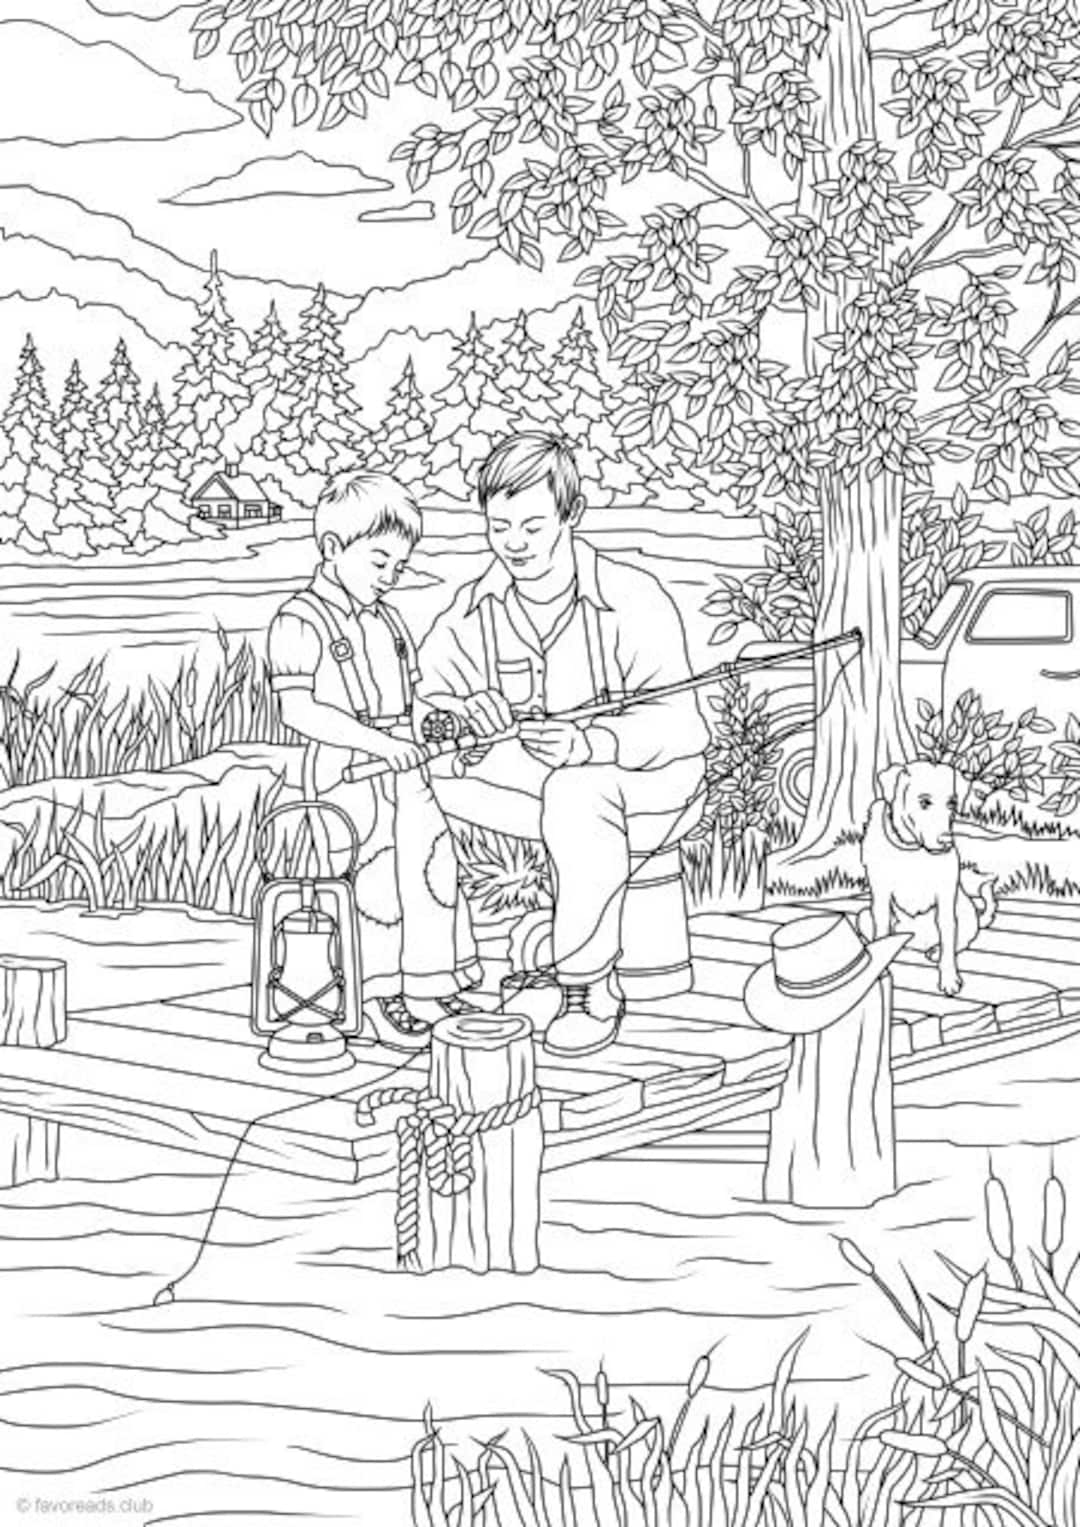 Country Fishing Printable Adult Coloring Page From Favoreads coloring Book  Pages for Adults and Kids, Coloring Sheets, Coloring Designs -  Canada